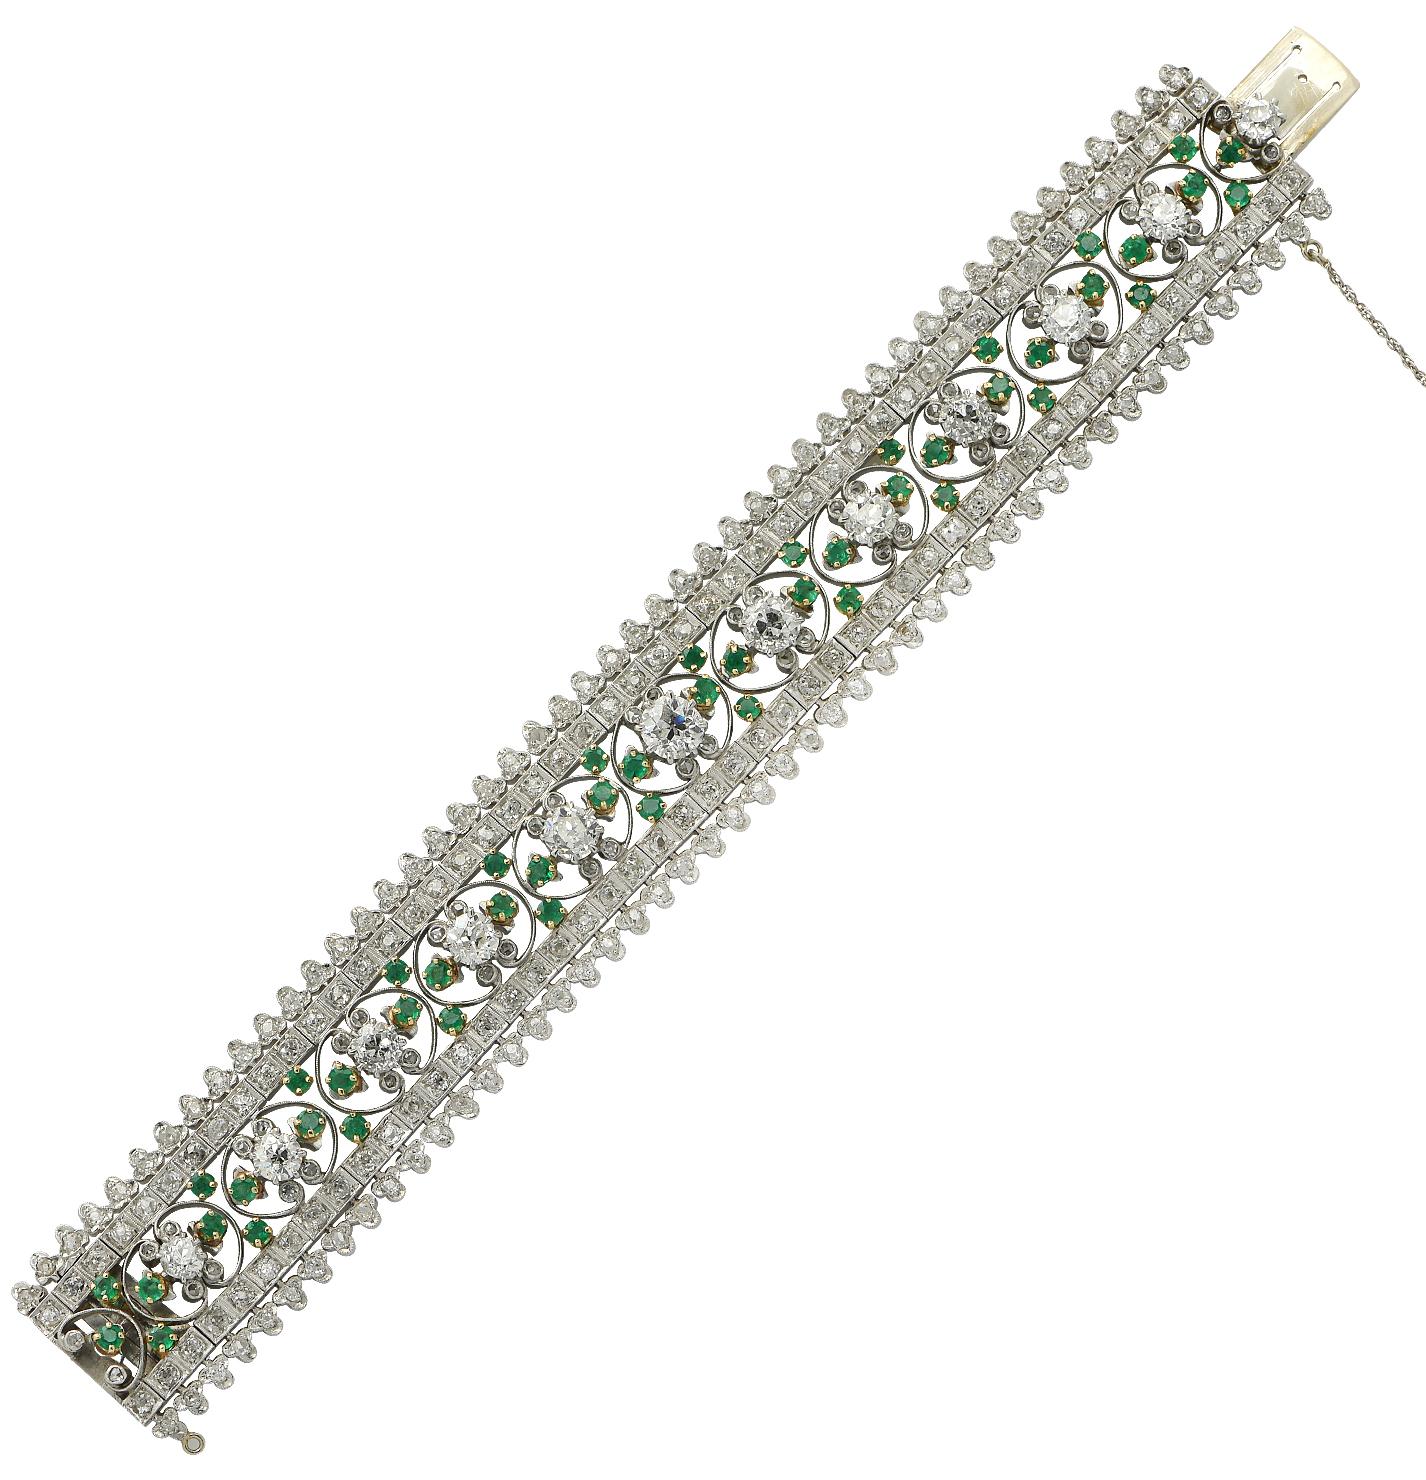 Sensational Marcus & Co. Edwardian  bracelet crafted in platinum and 18 karat yellow gold. This spectacular bracelet features Old Mine Cut and Rose Cut diamonds weighing approximately 17.55 carats total, G-H color, SI clarity, and 48 round emeralds